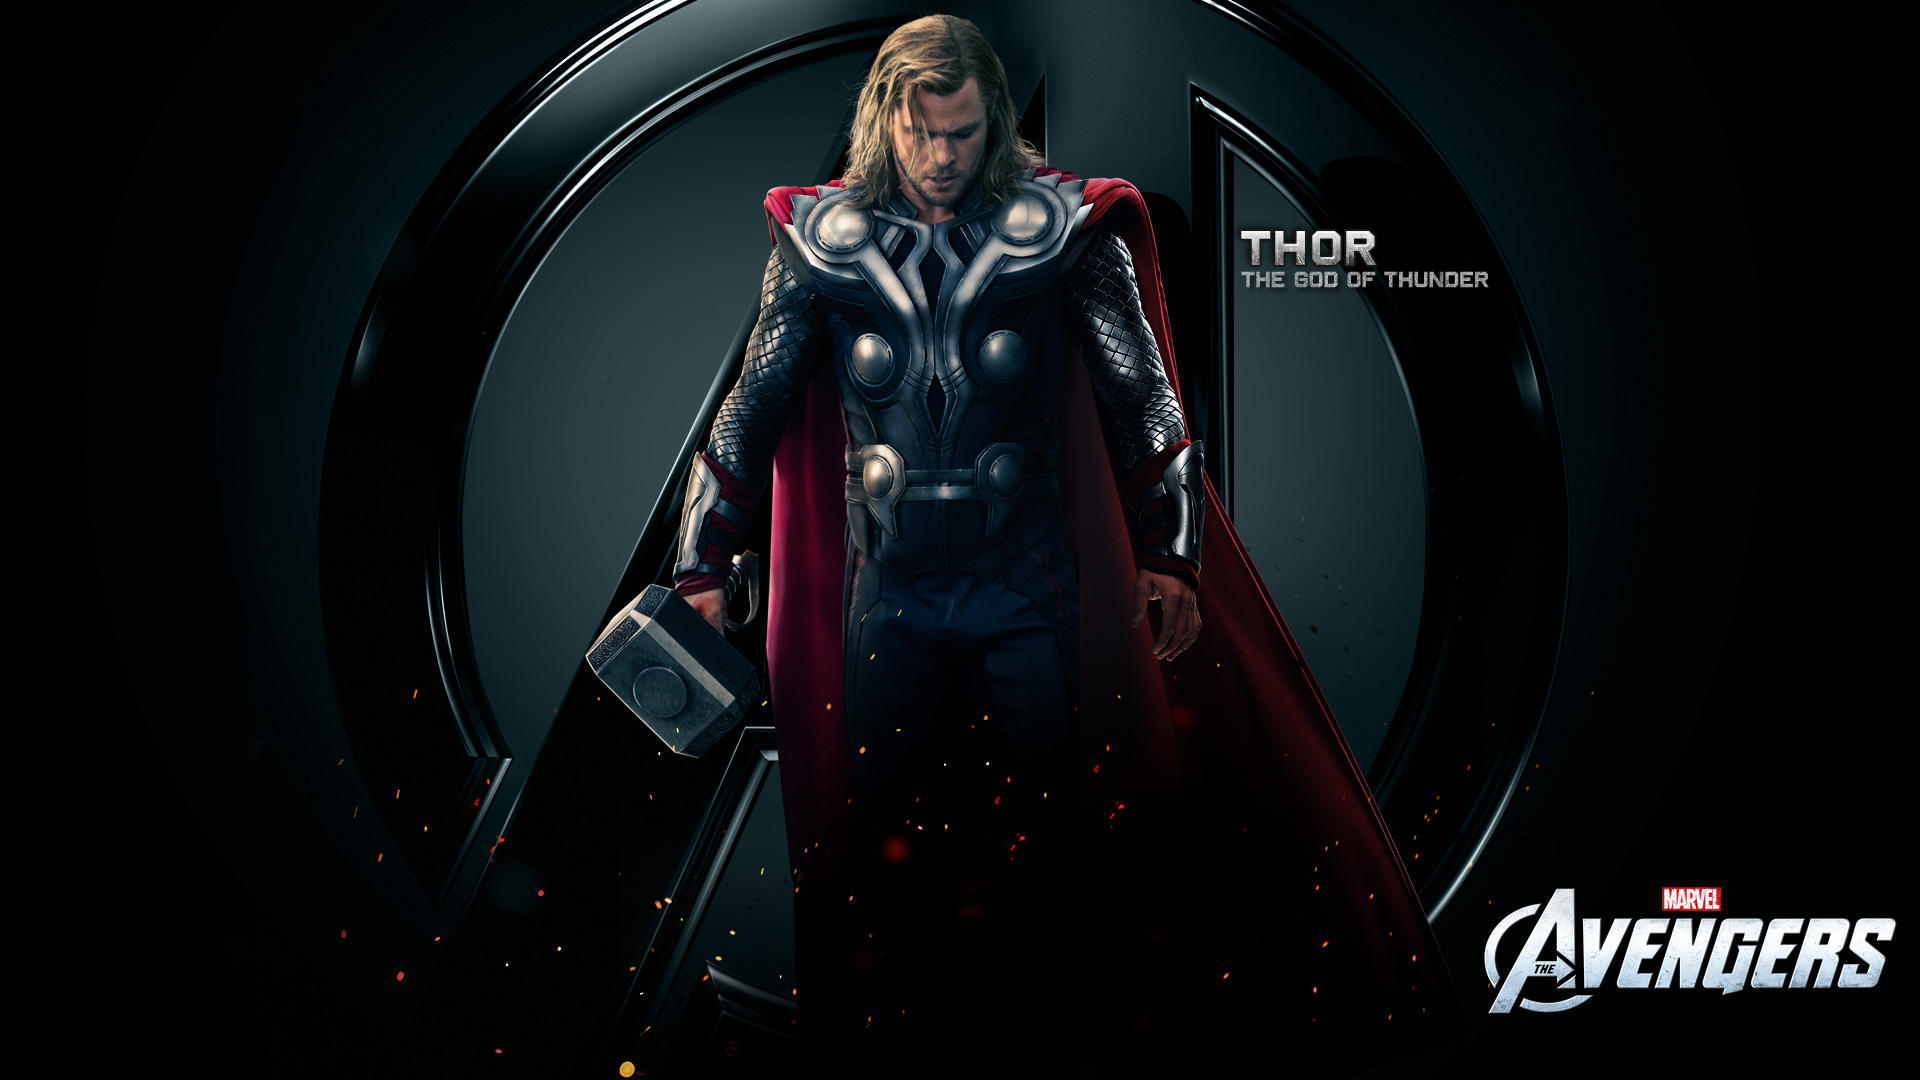 Thor The God of Thunder Wallpapers | WallpaperCow.com